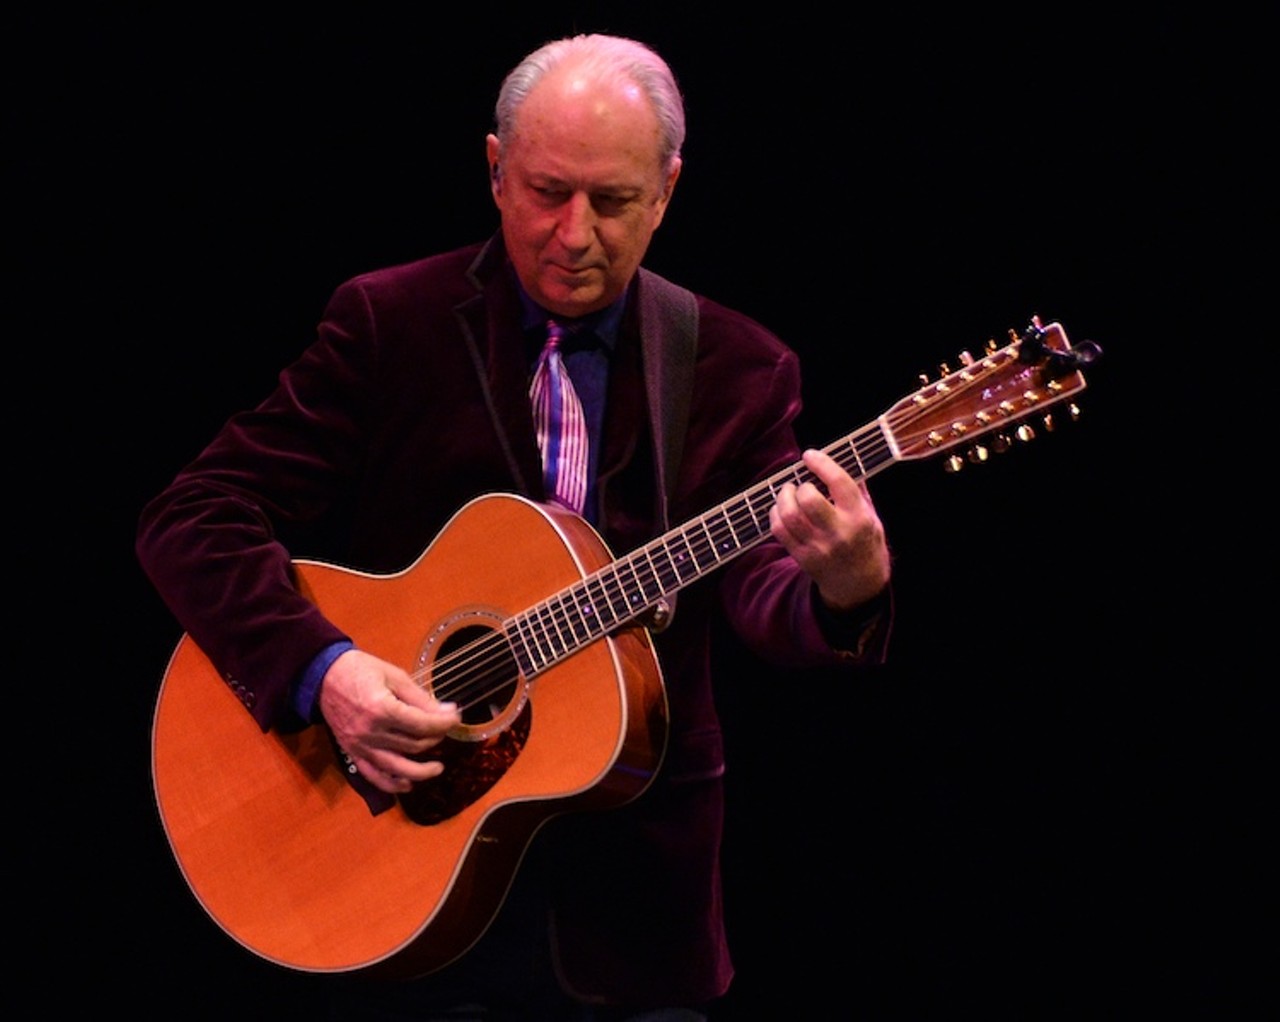 Michael Nesmith performing at the Stocker Center